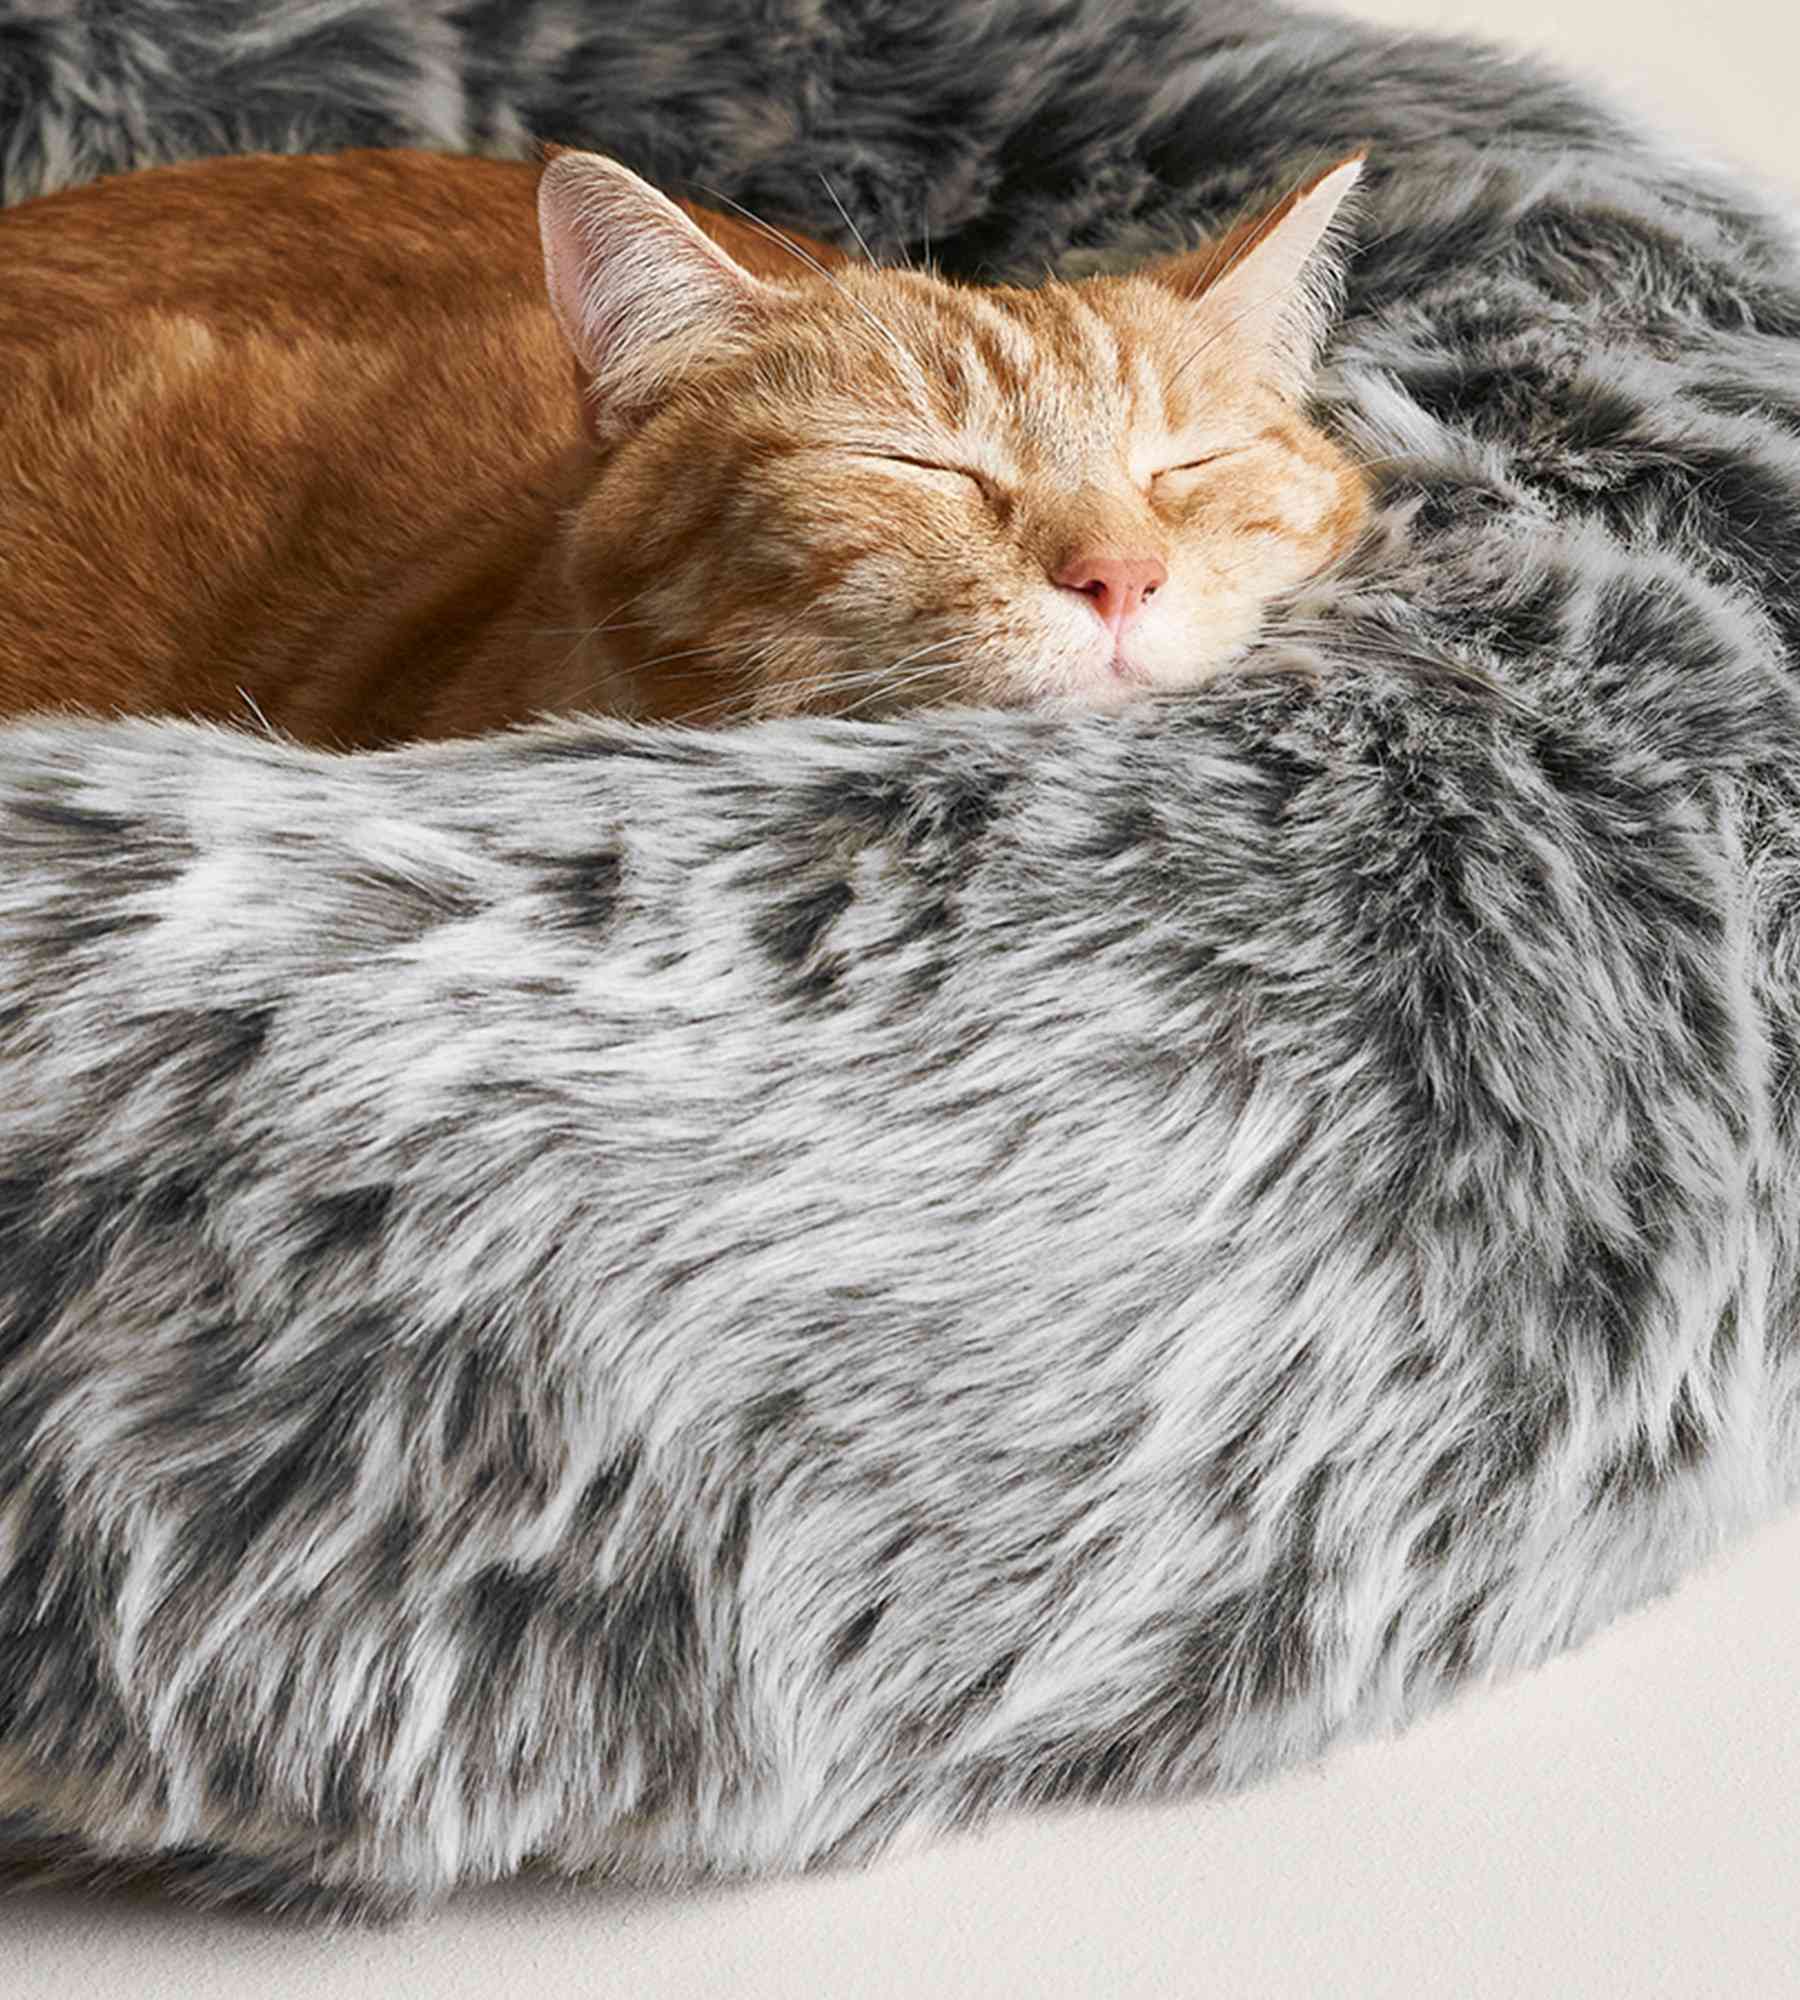 2024 Cat Lovers Gift Guide: 40+ Unique Gifts for Cat Lovers – tuft